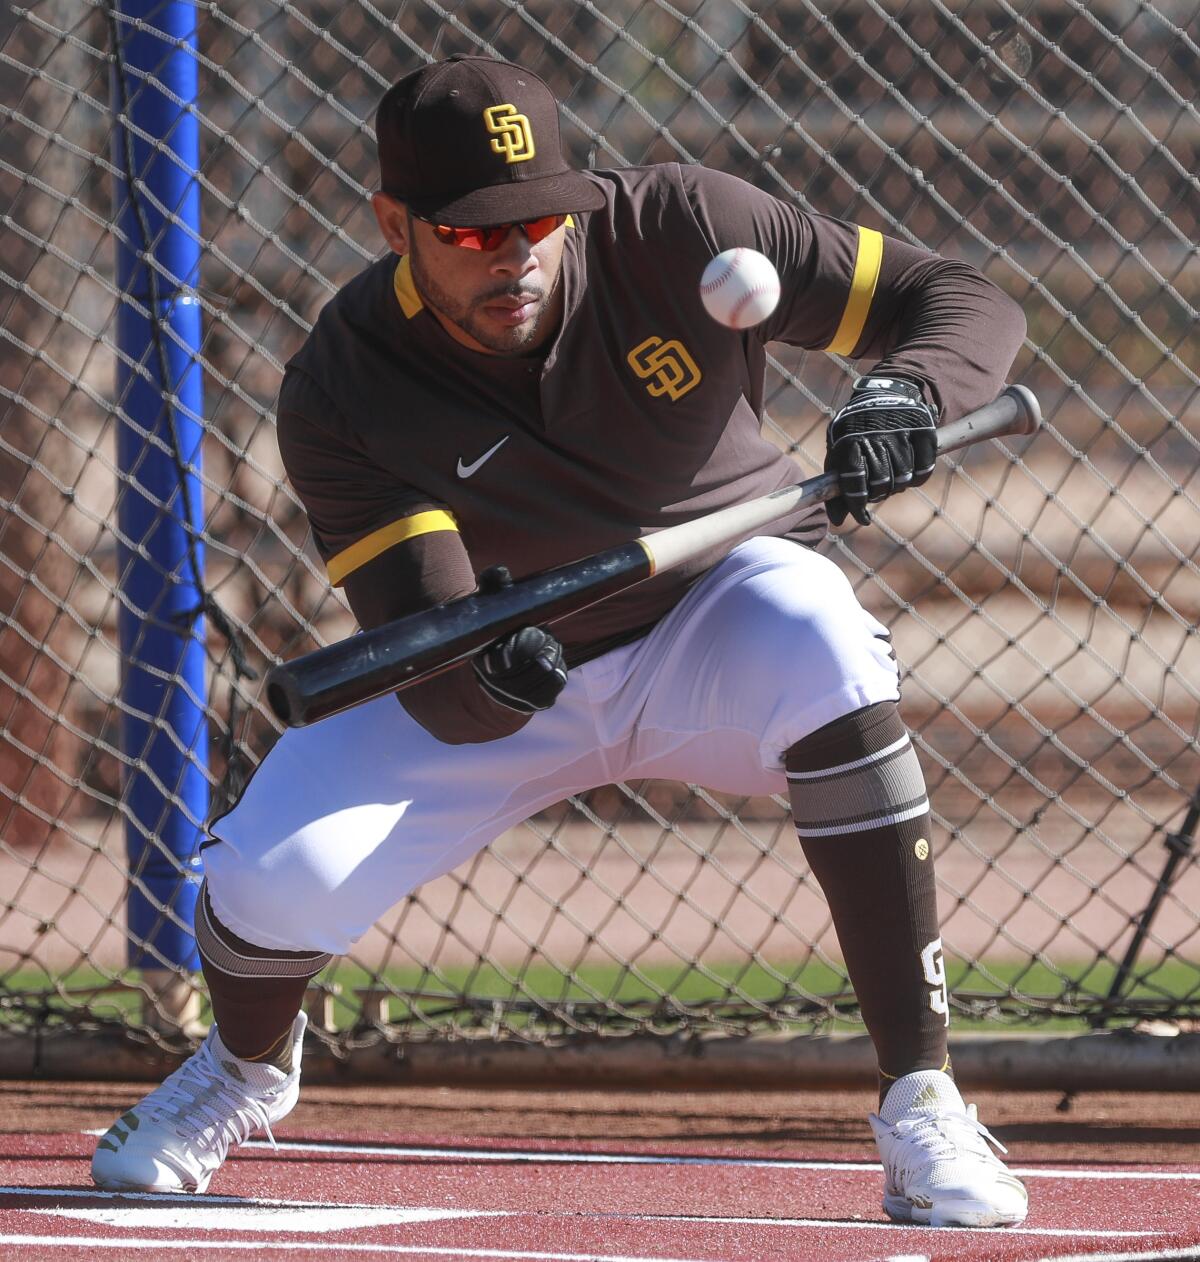 Padres' Tommy Pham bunts during spring training at the Peoria Sports Complex on February 15, 2020 in Peoria, Arizona.